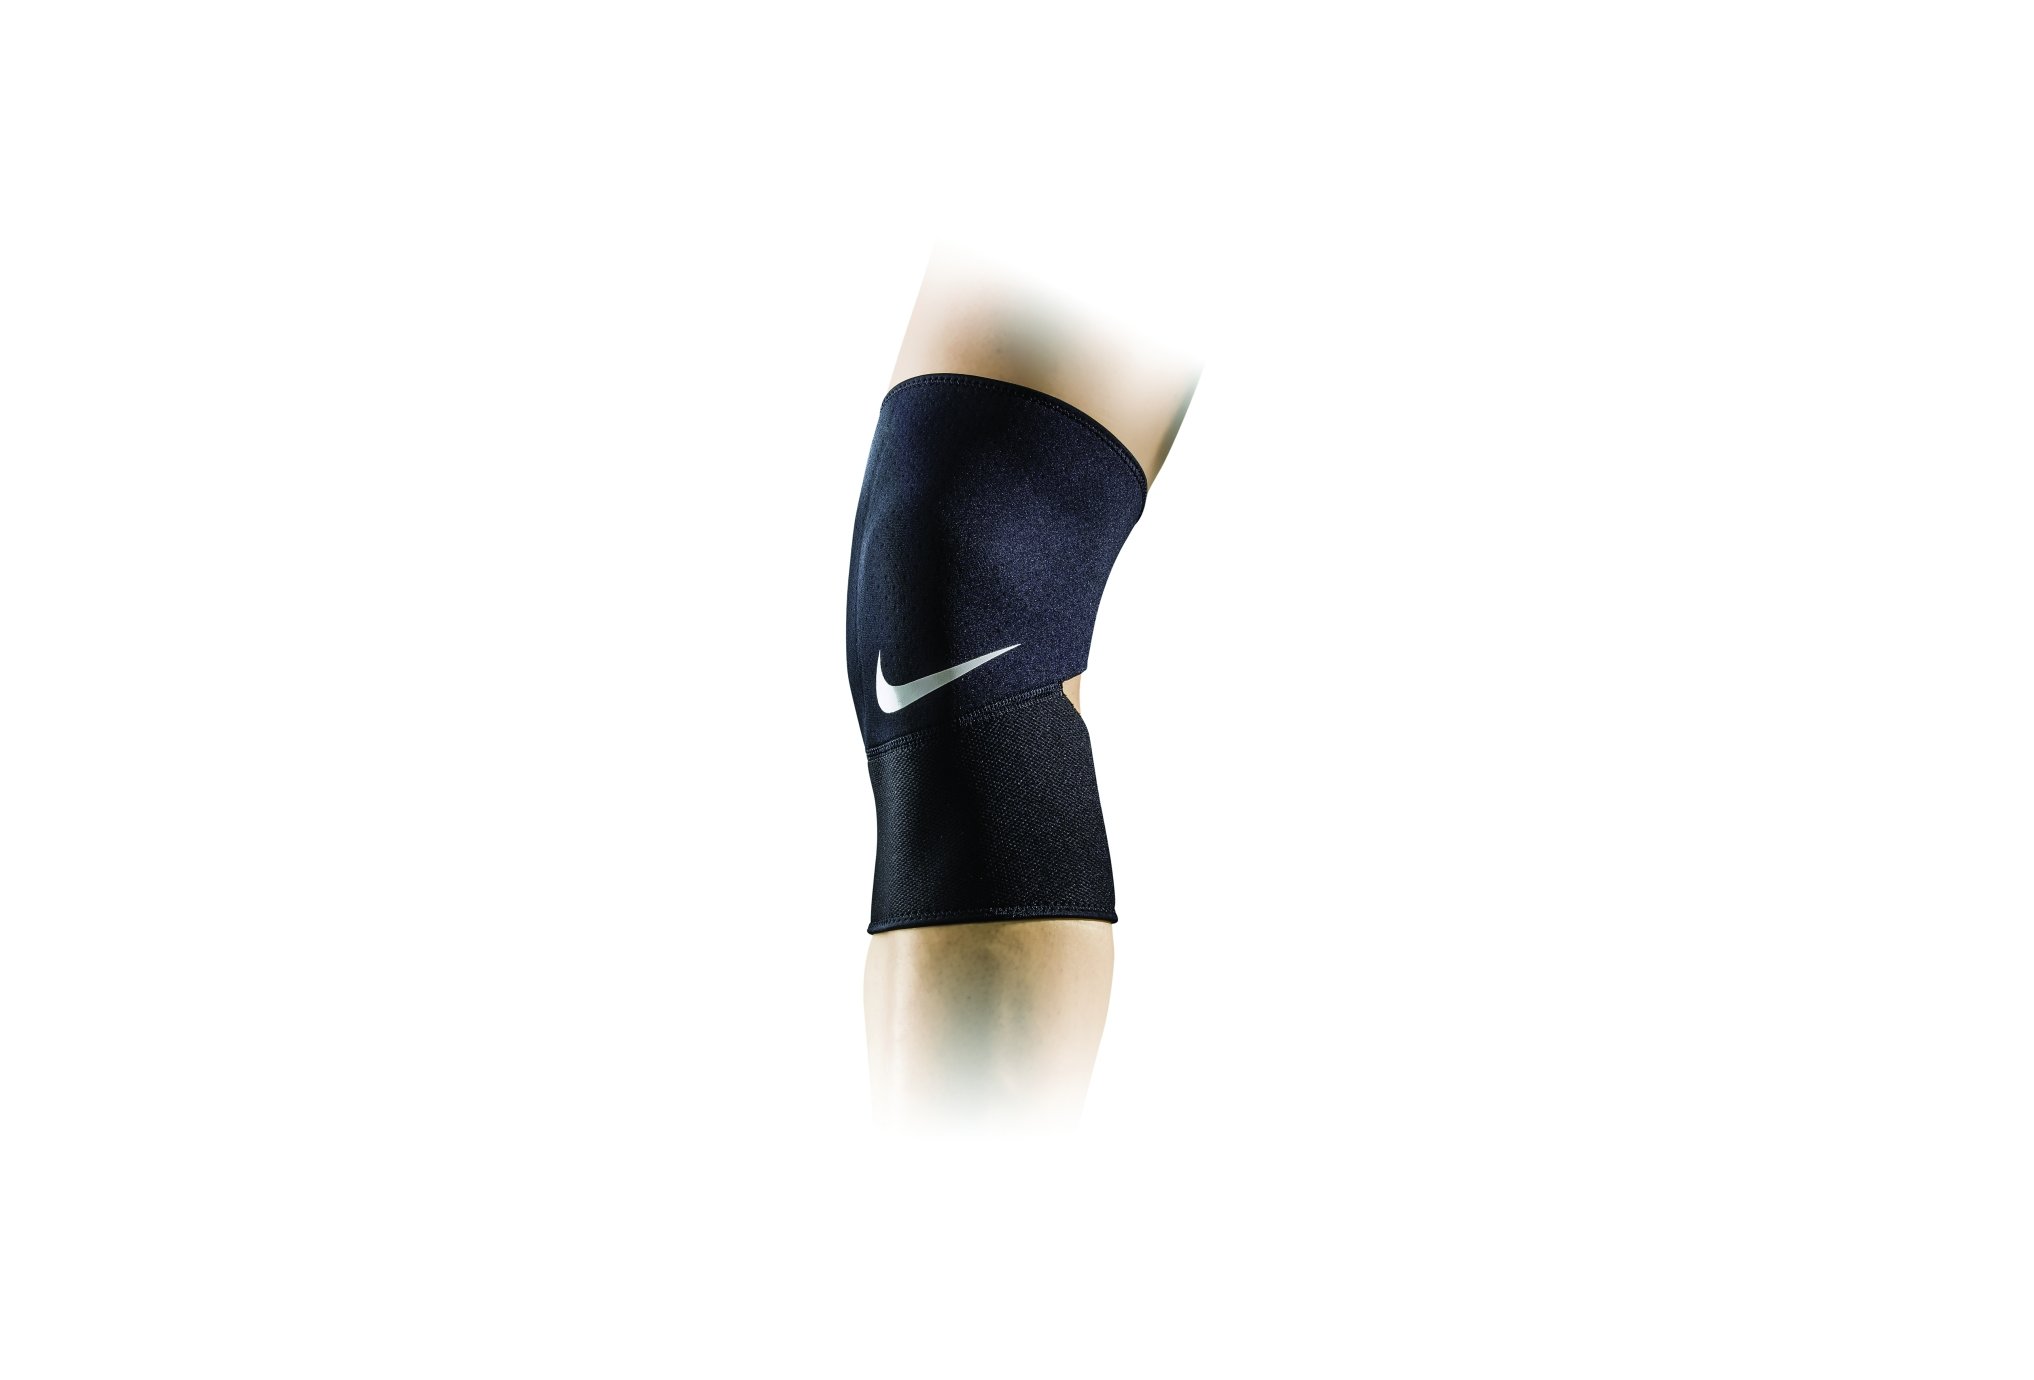 Nike Genouillre closed patella protection musculaire & articulaire